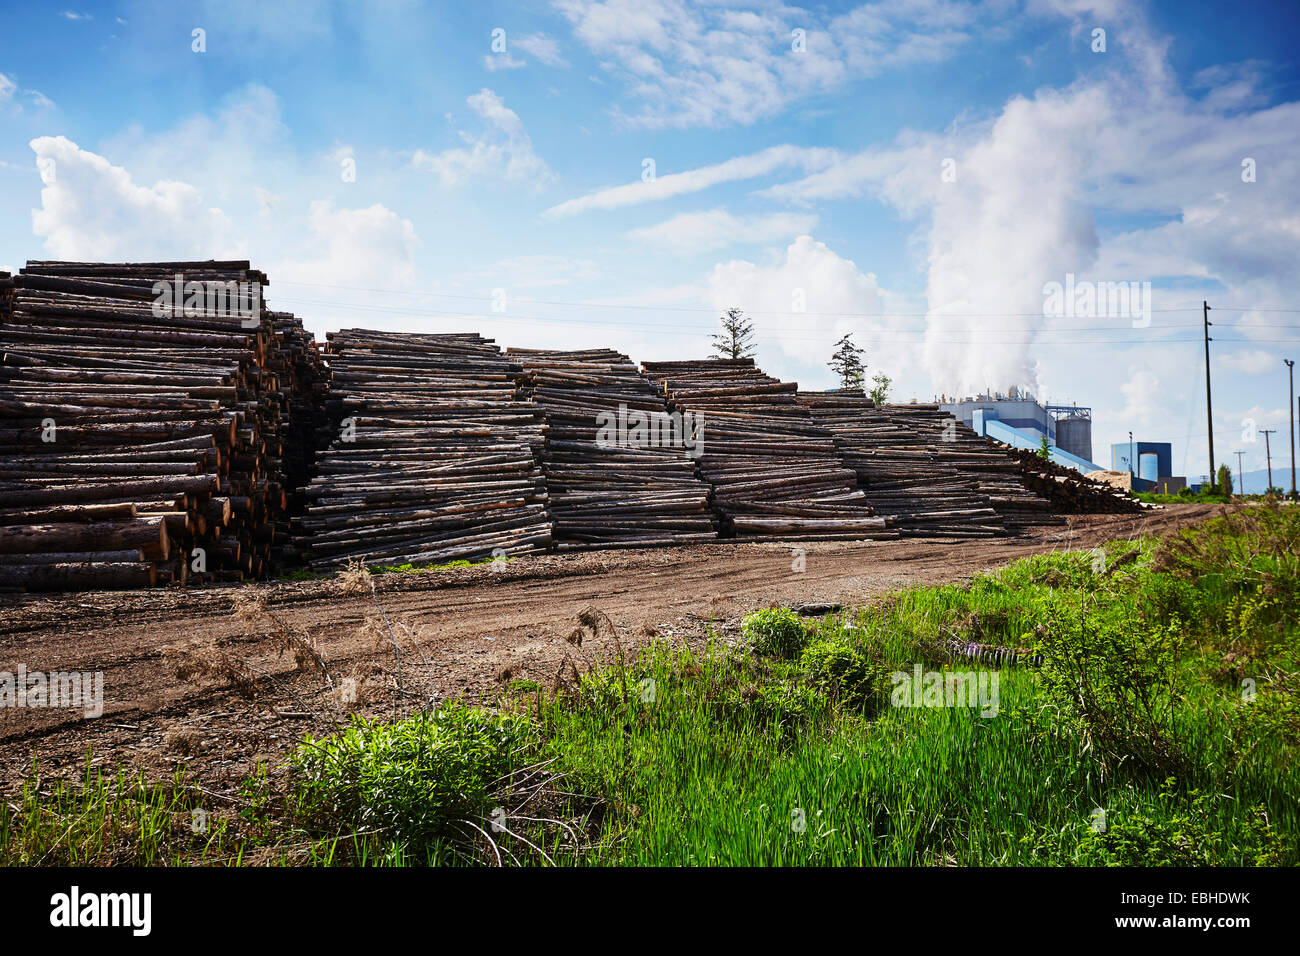 Rows of stacked logged timber in timber yard Stock Photo